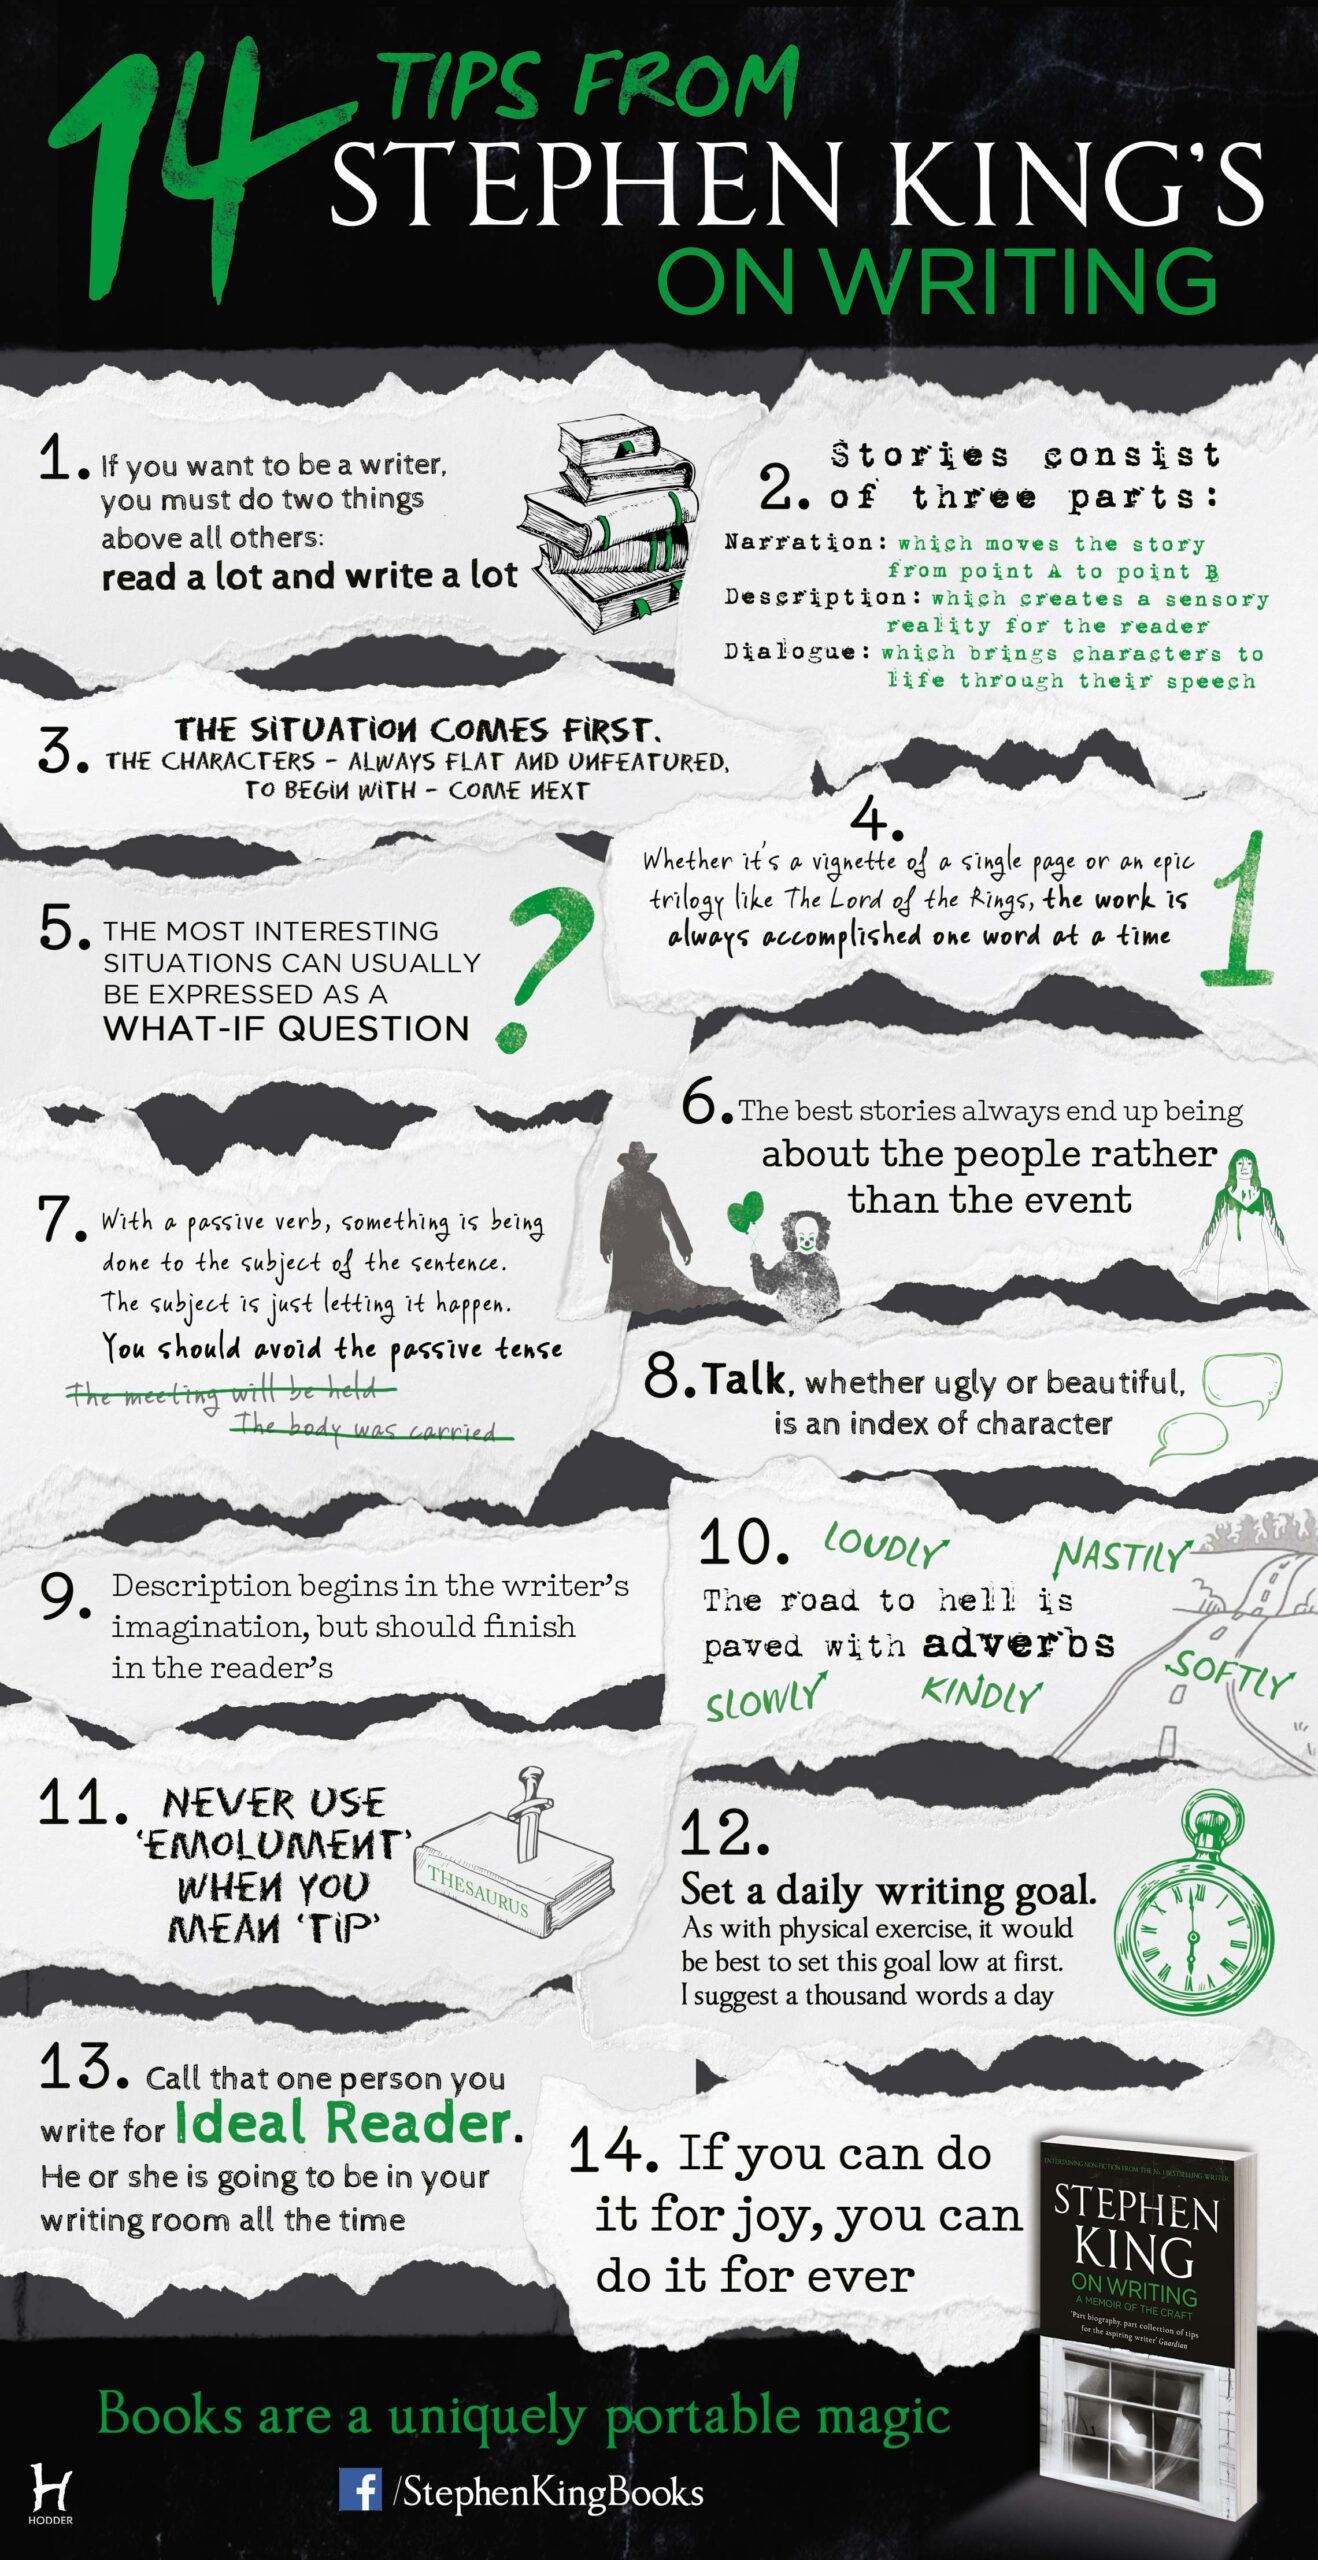 An infographic of Stephen King's tips from 